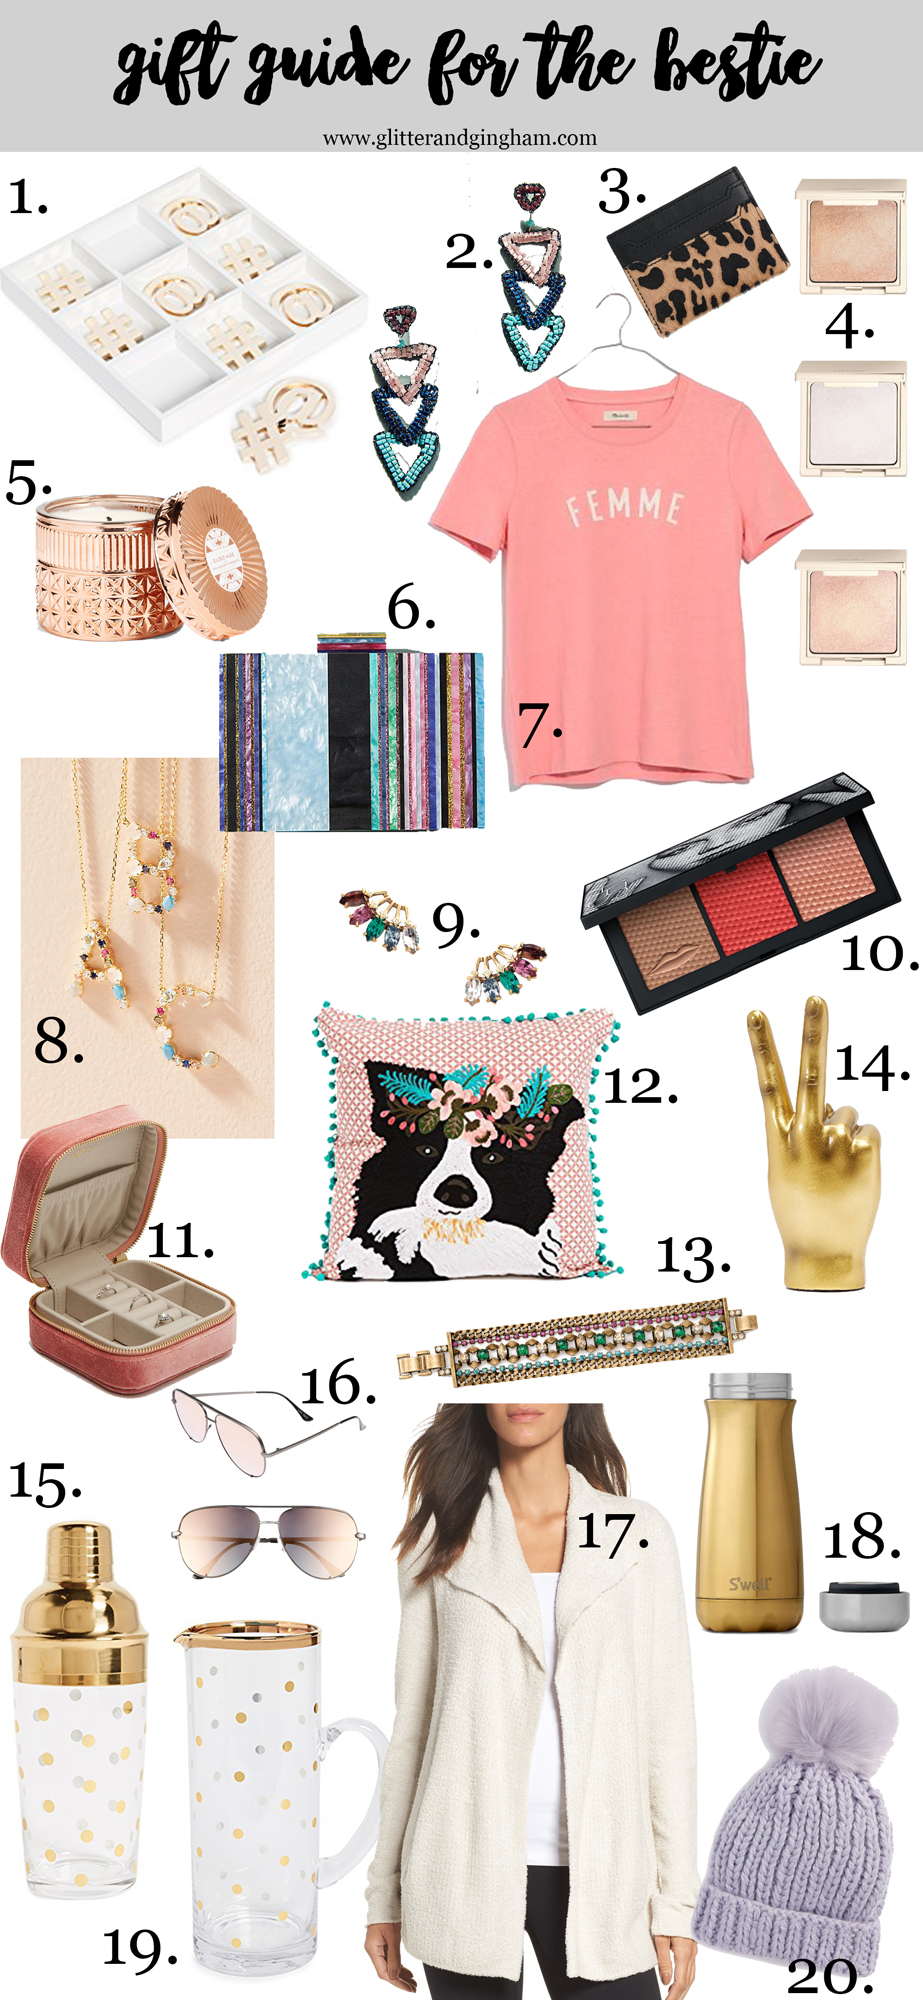 DIY Diva Christmas Gift Idea List: What To Buy Her?